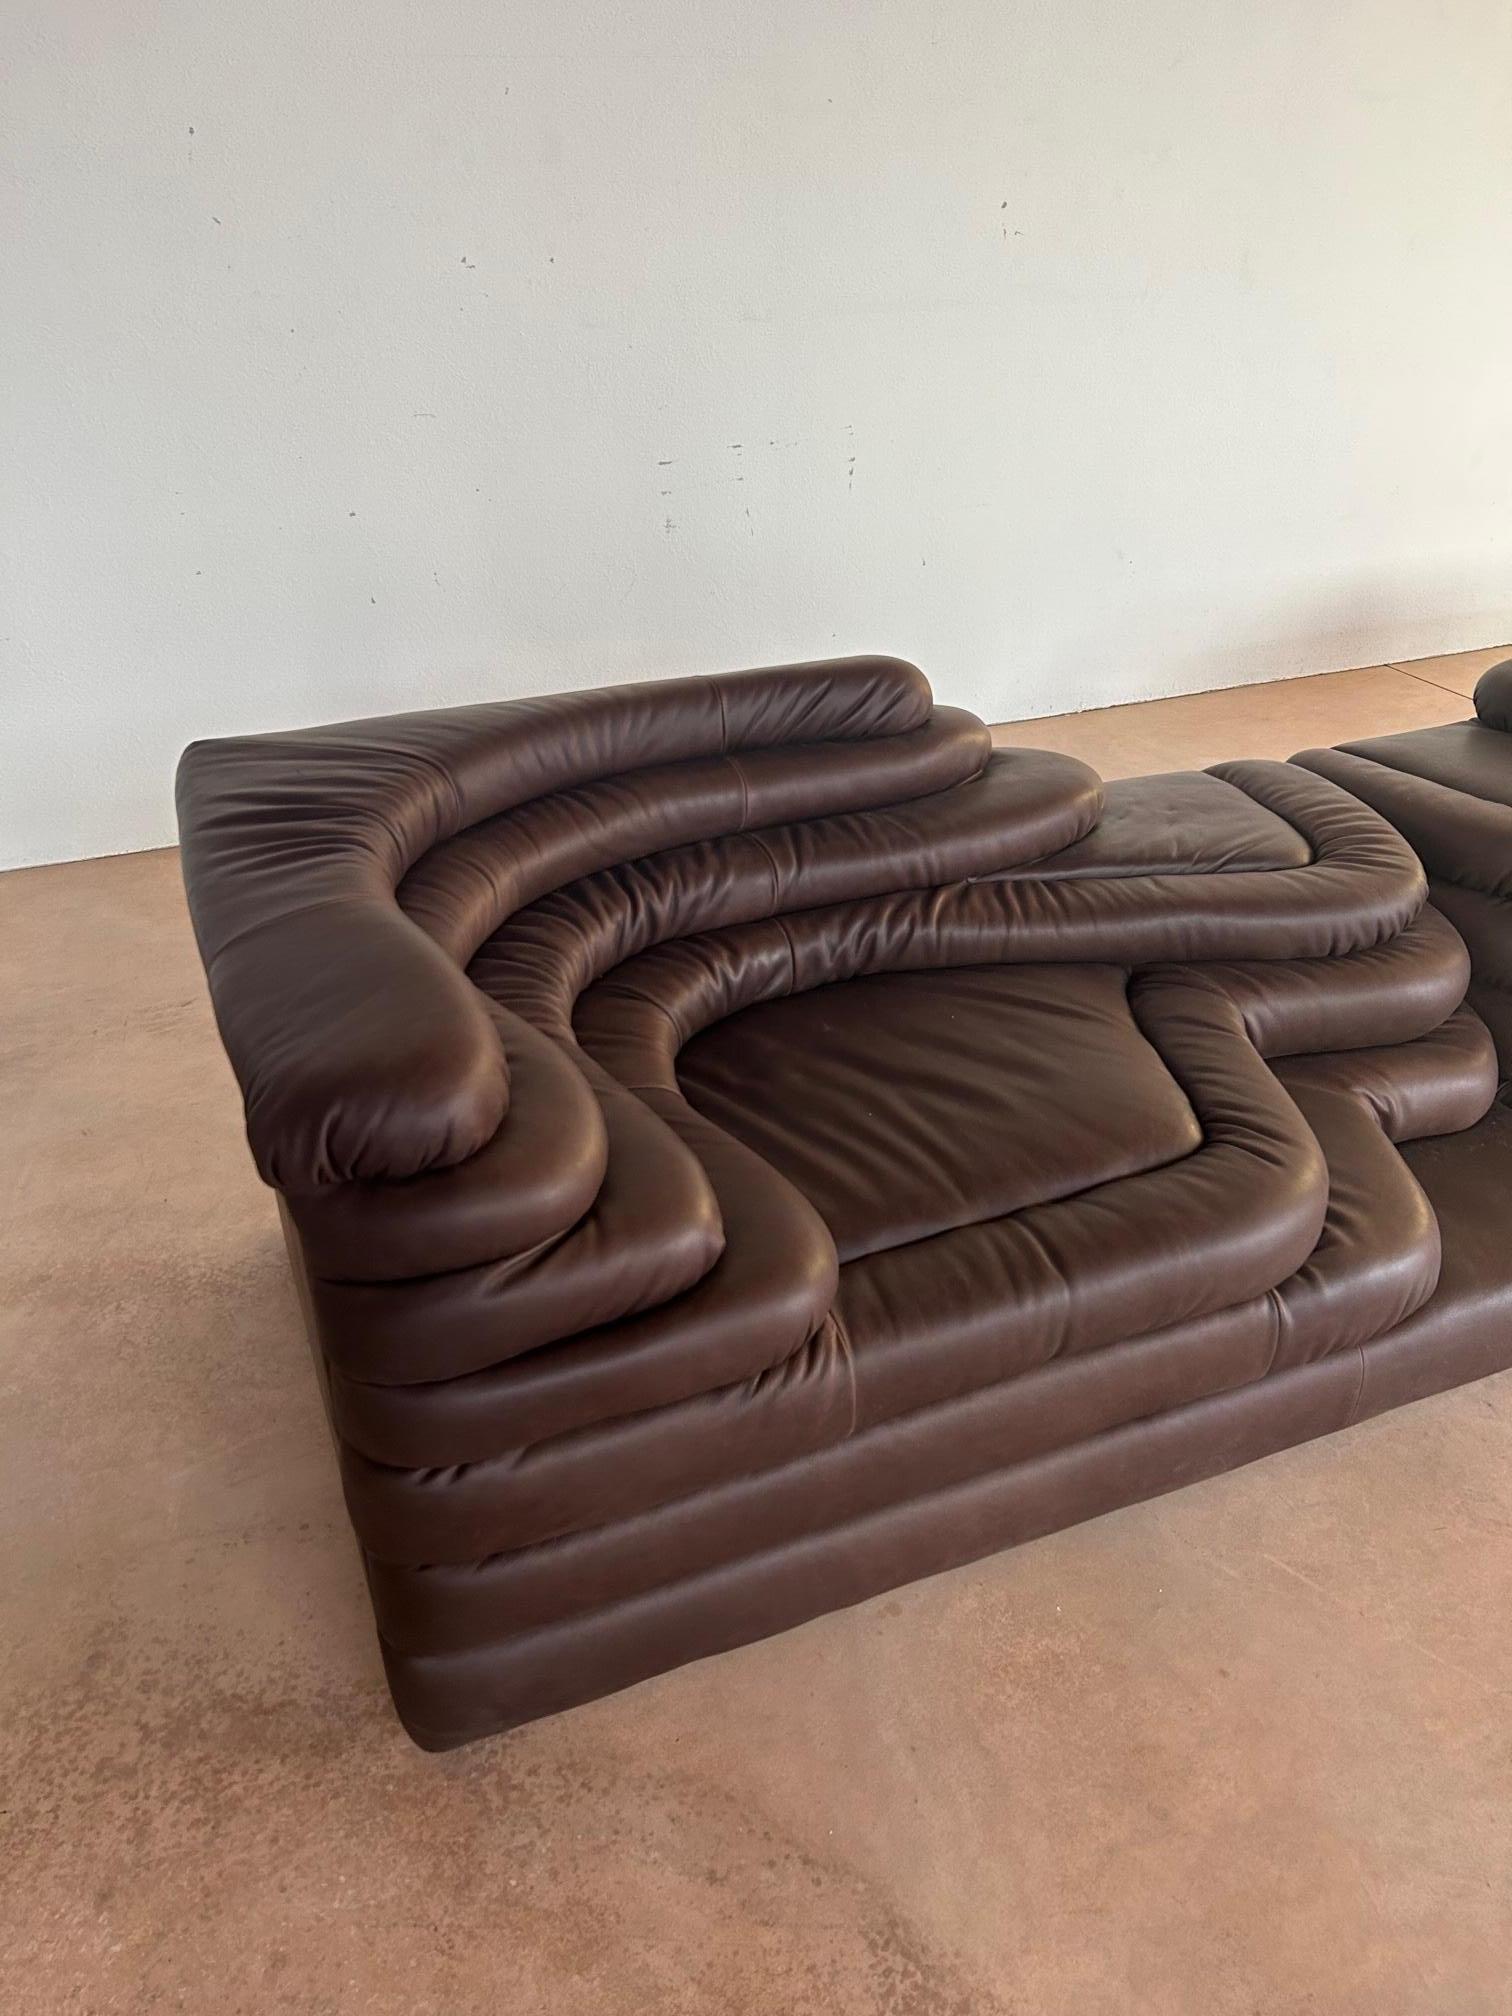 A pair of DS-125 Terrazza sofa in dark brown leather designed by Ubald Klug for De Sede in the seventies. The shapes inspired by nature of this sofa combined with the great quality of construction make it a real seat work of art. 

